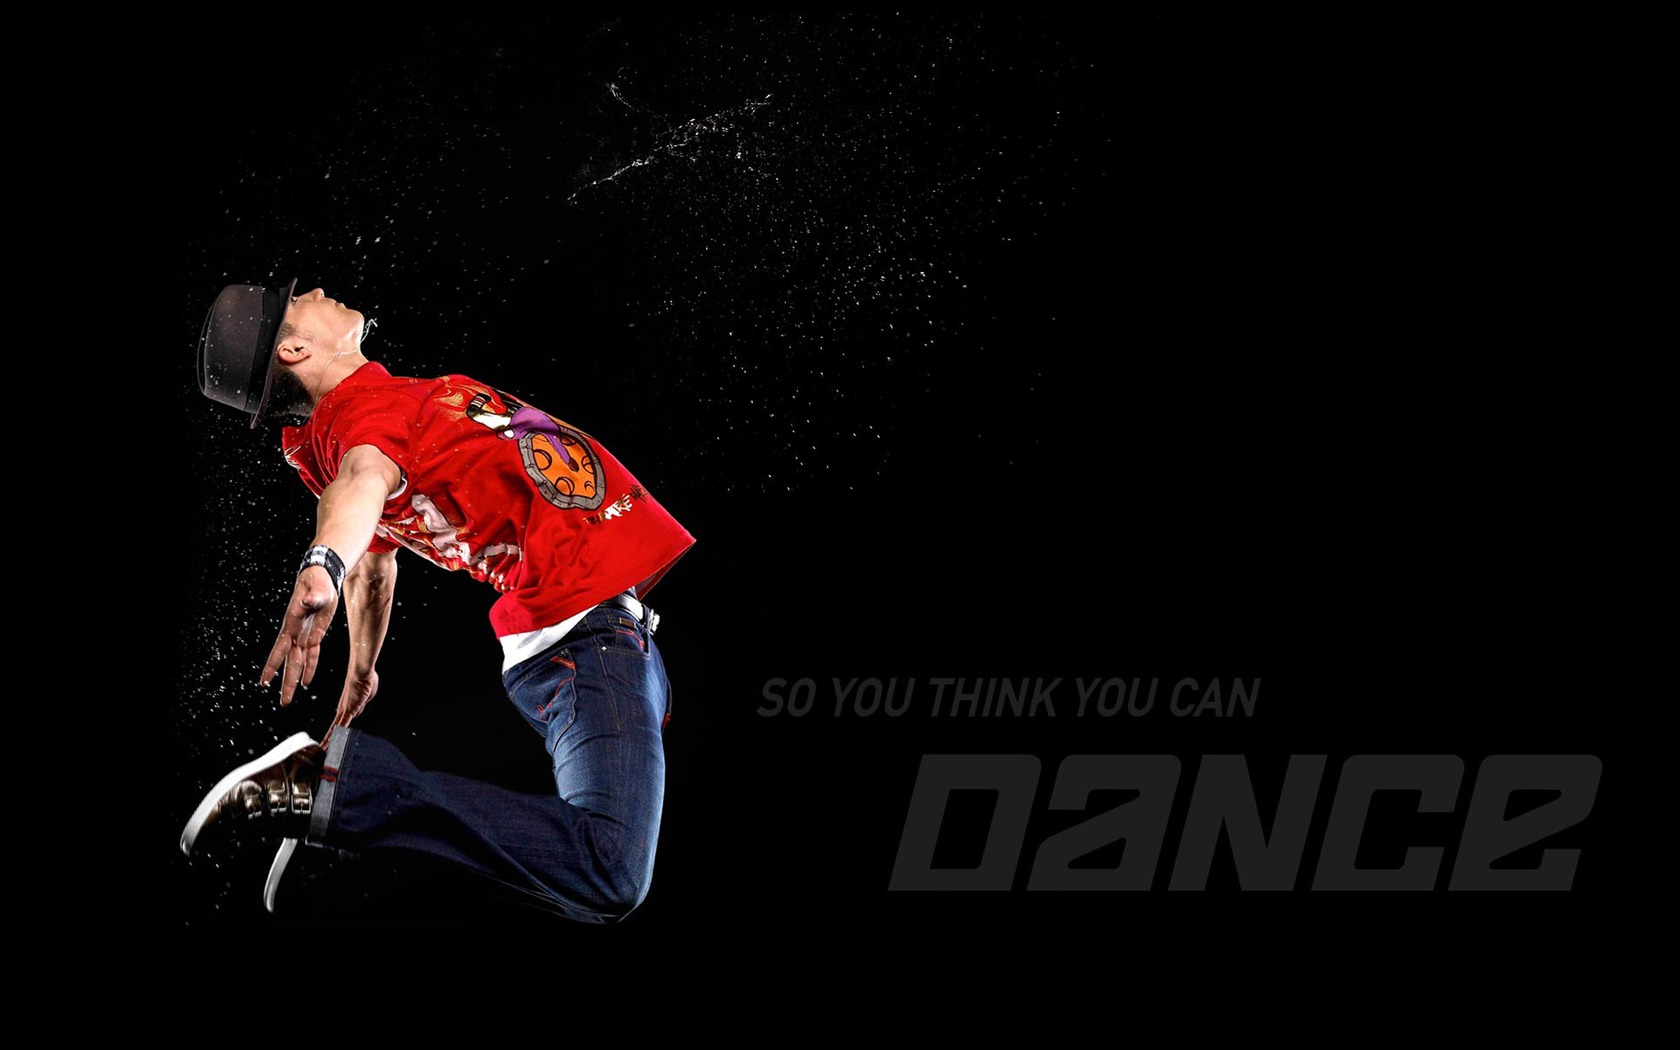 So You Think You Can Dance Wallpaper (1) #6 - 1680x1050